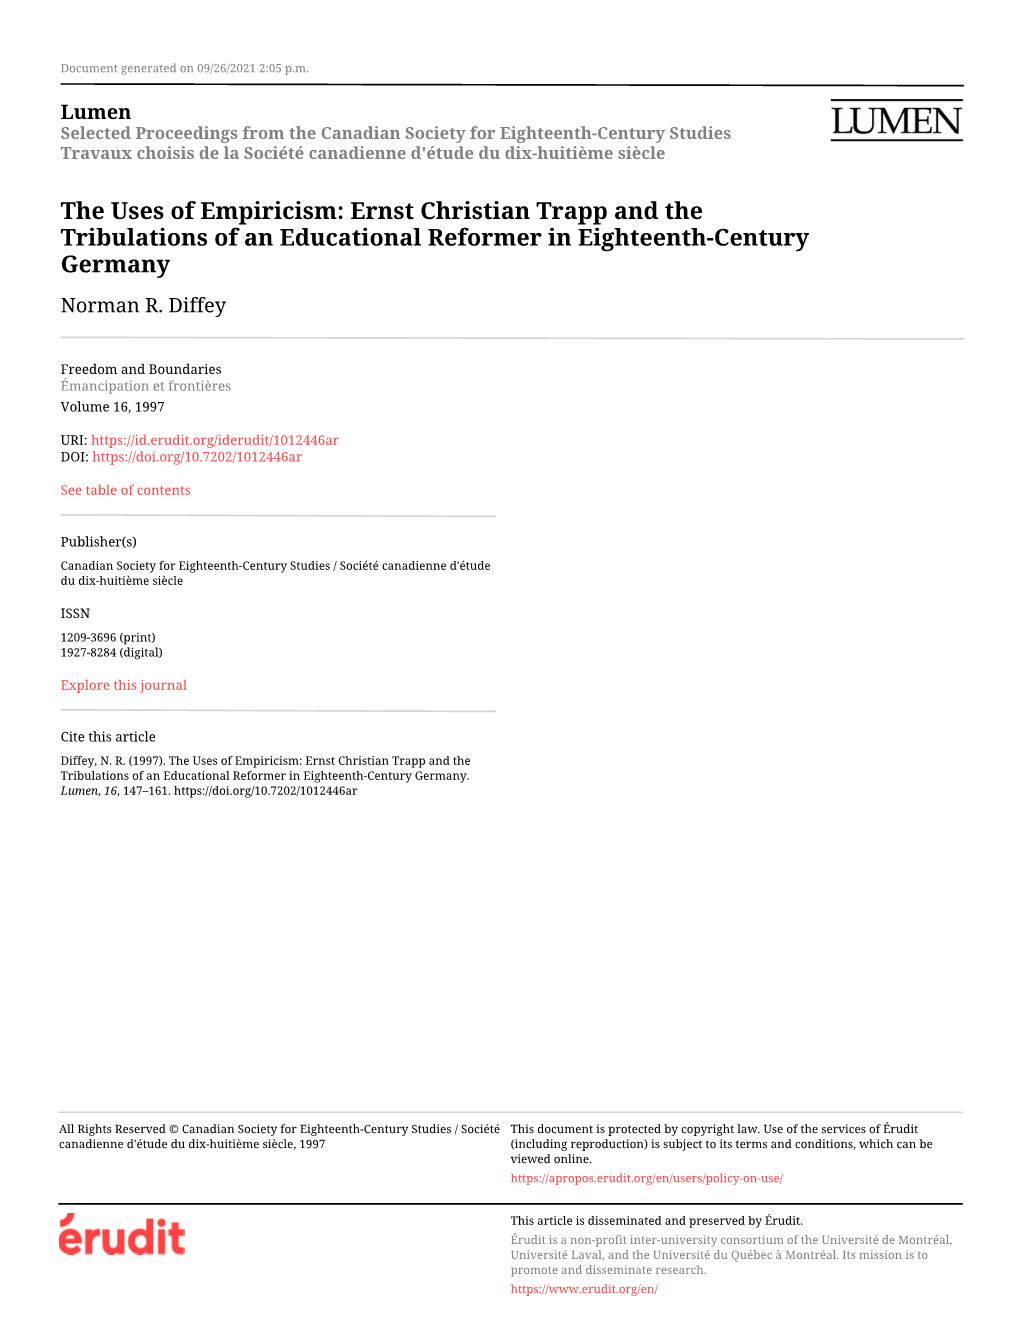 The Uses of Empiricism: Ernst Christian Trapp and the Tribulations of an Educational Reformer in Eighteenth-Century Germany Norman R